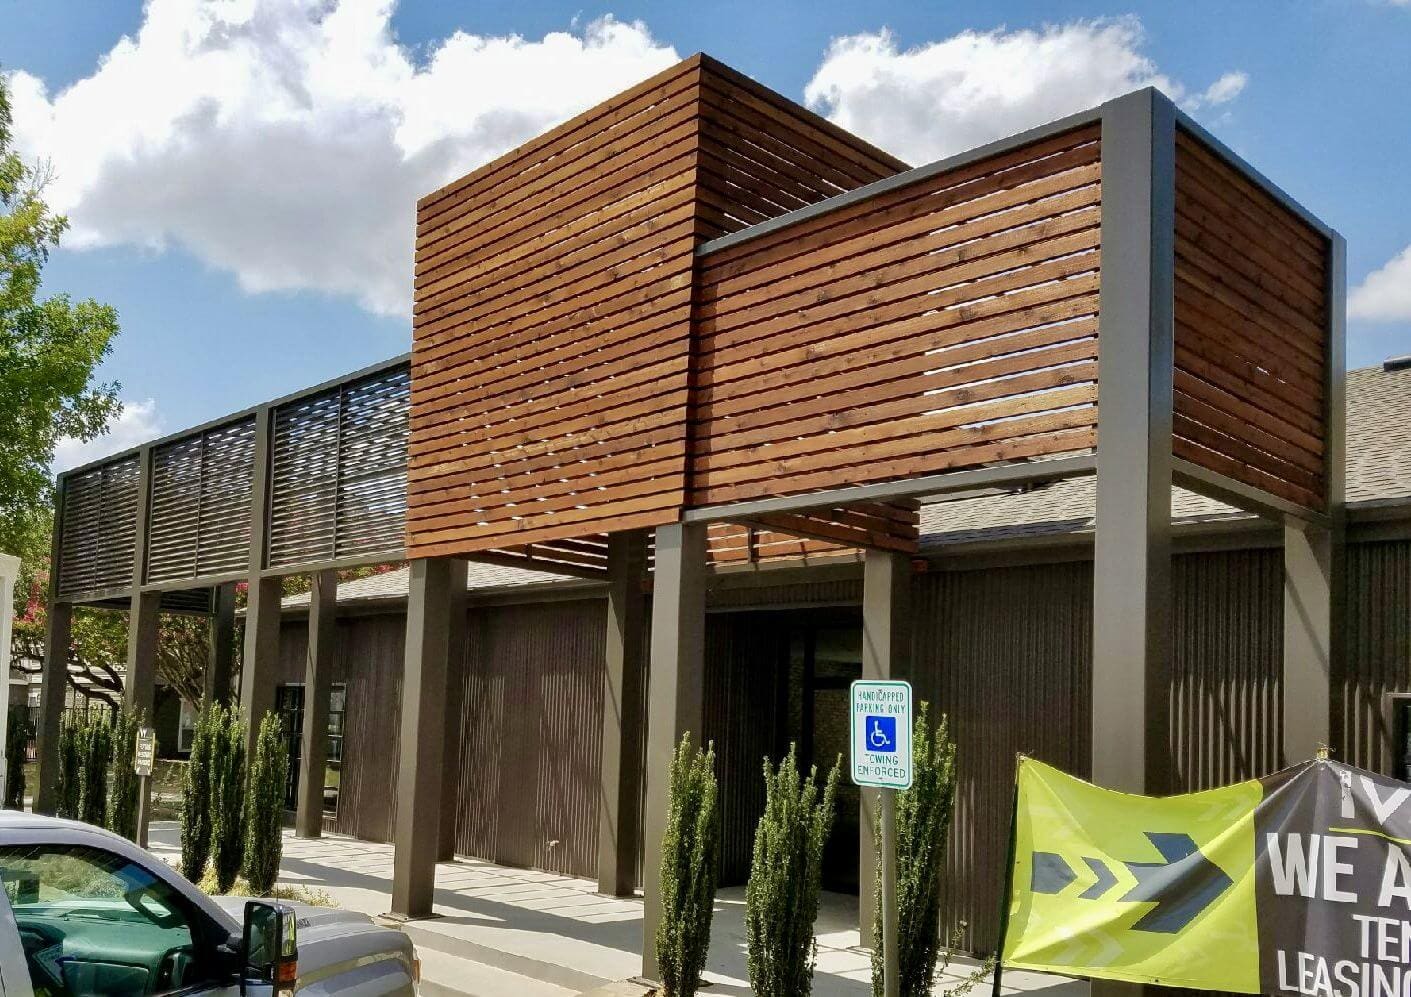 A building with wooden slats on the side of it.